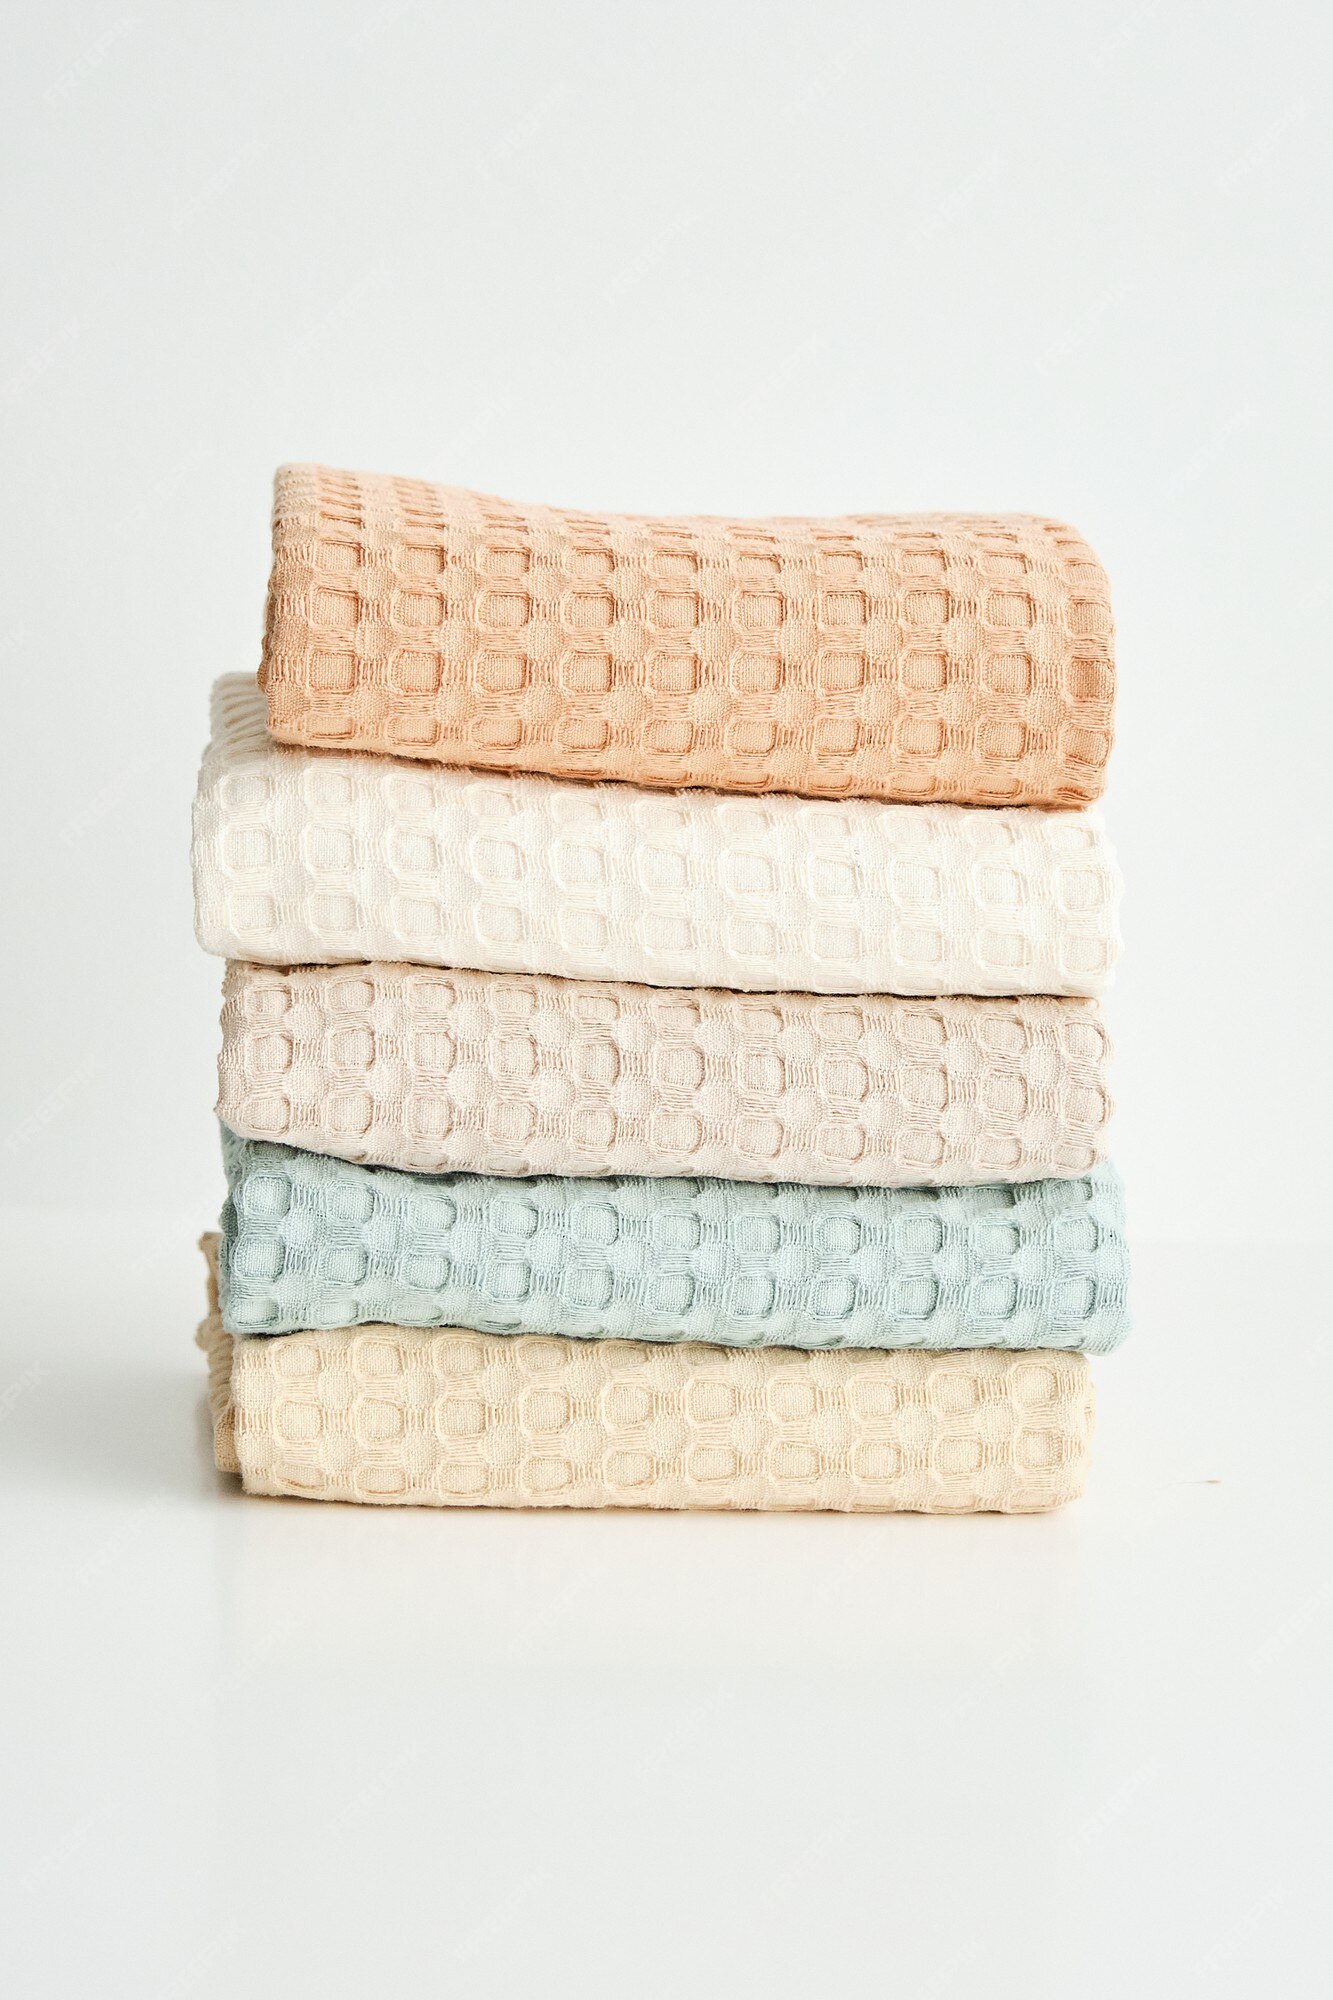 Premium Photo  Collection of natural muslin kitchen towels stacked neatly  in a vertical stack